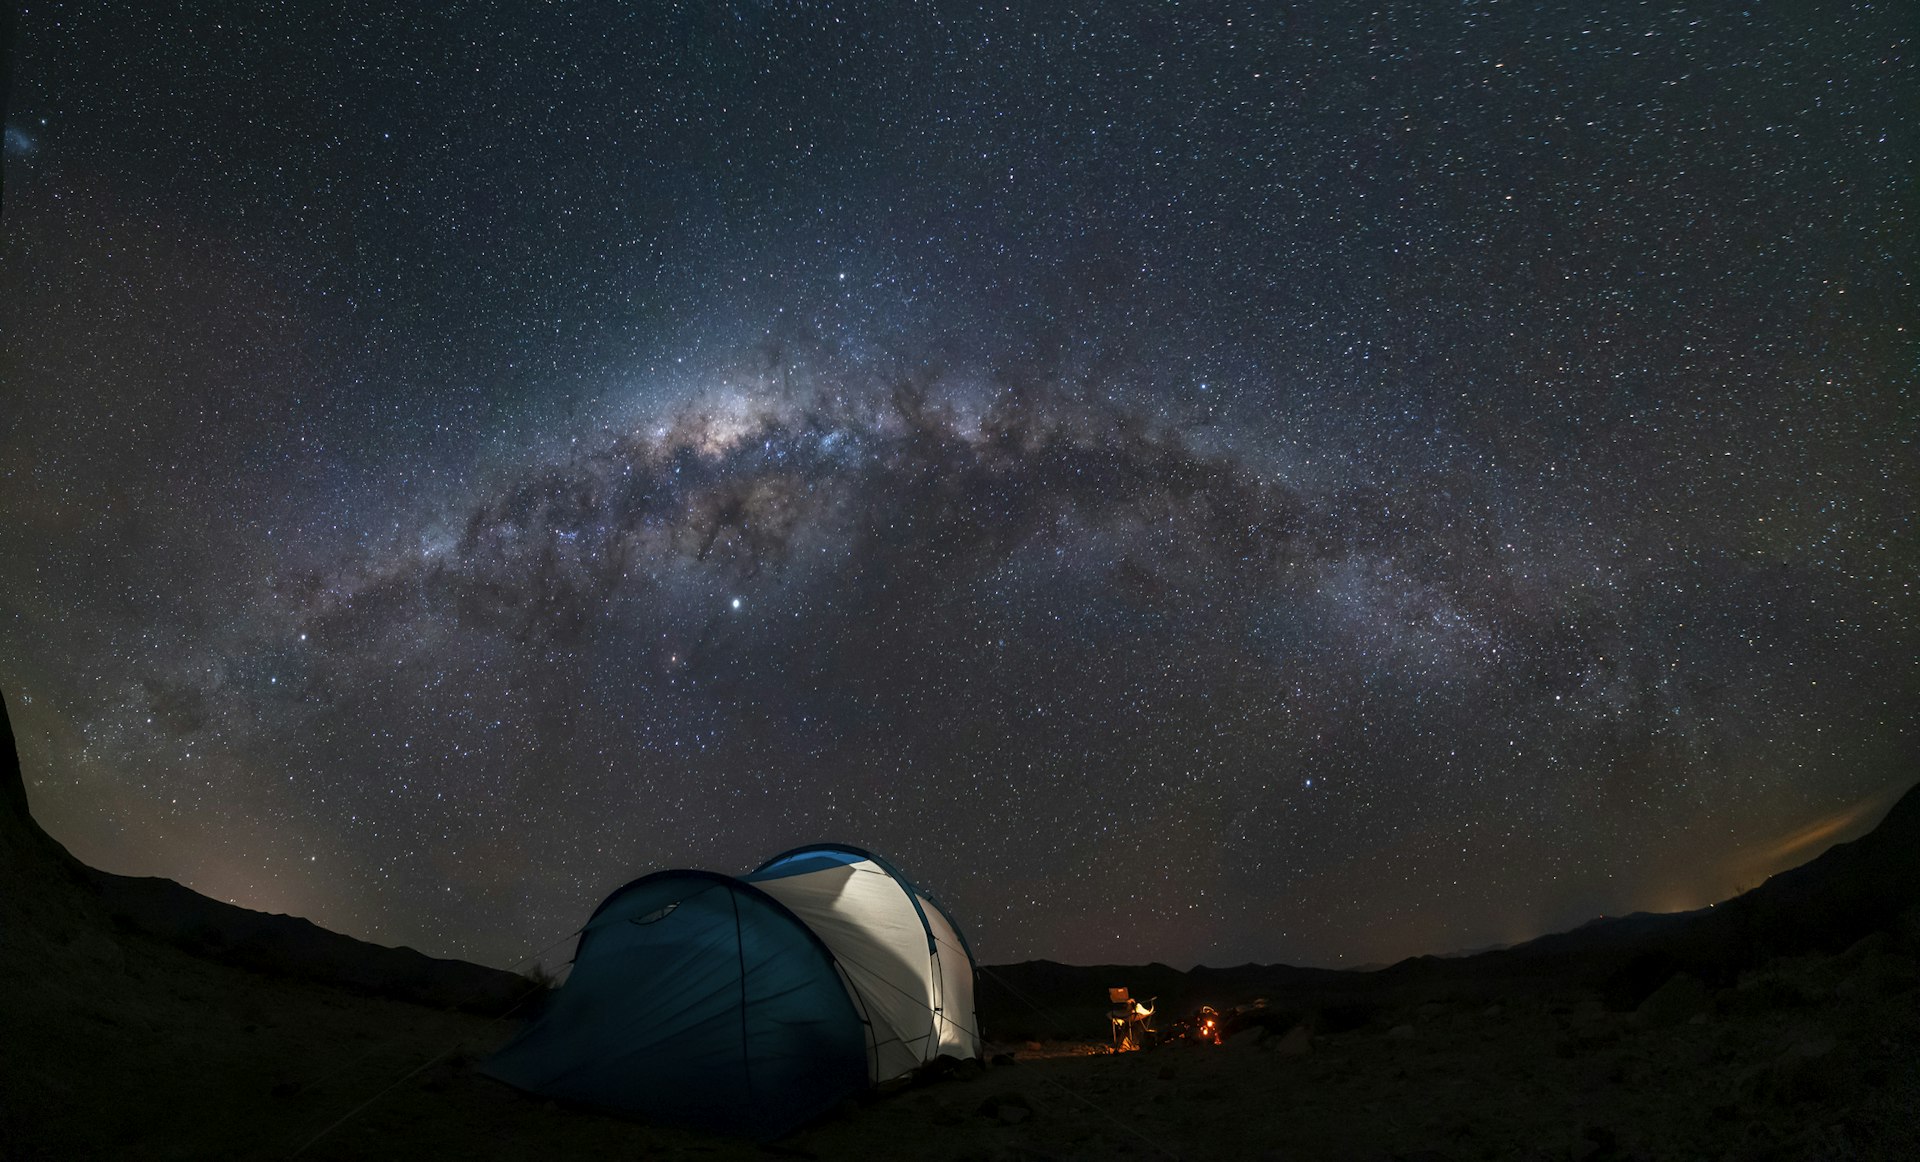 A tent, a campfire and a dark sky lit up with stars with the sweep of the Milky Way